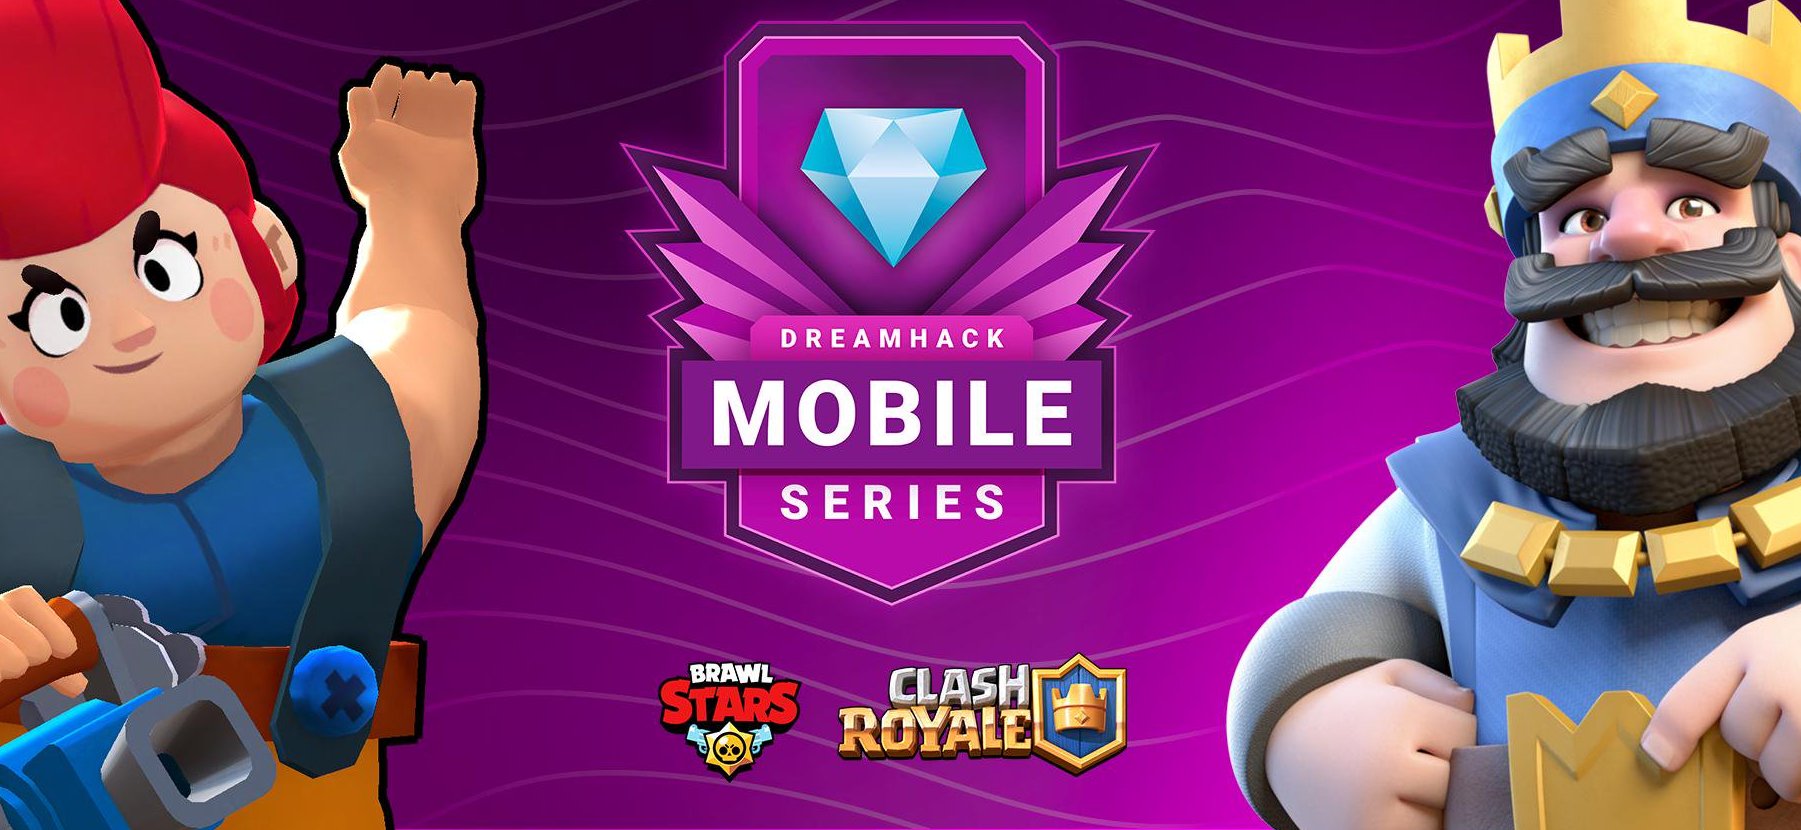 Dreamhack Mobile Series At Dallas To Be Held This Weekend And Will Feature Brawl Stars And Clash Royale Dot Esports - brawl stars logo in clash royale